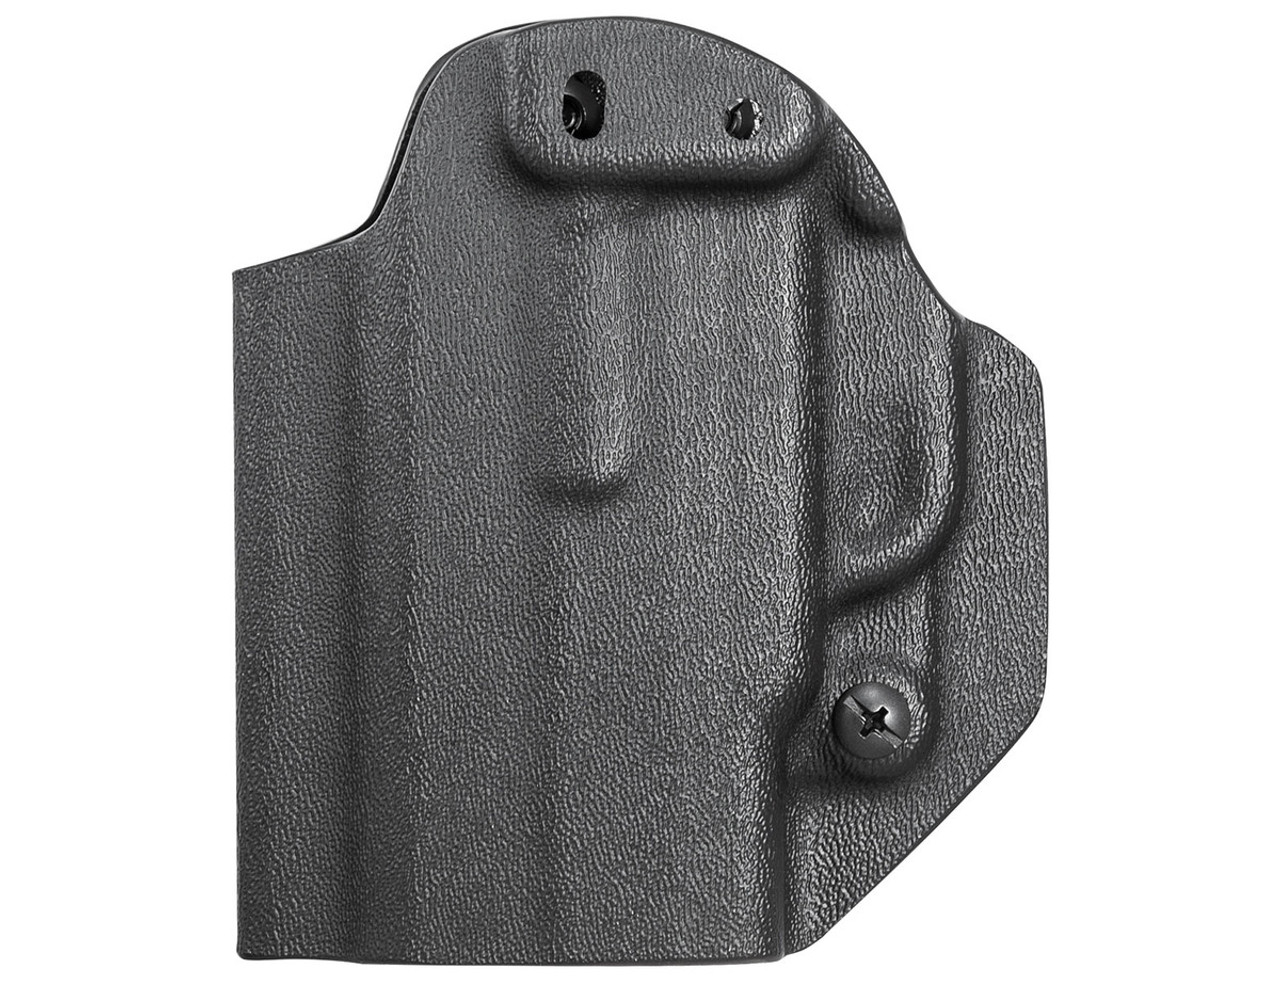 Mission First Tactical S&W M&P Shield 2.0 9MM/.40 Cal W/ Integrated Laser Ambidextrous Appendix IWB/OWB Holster